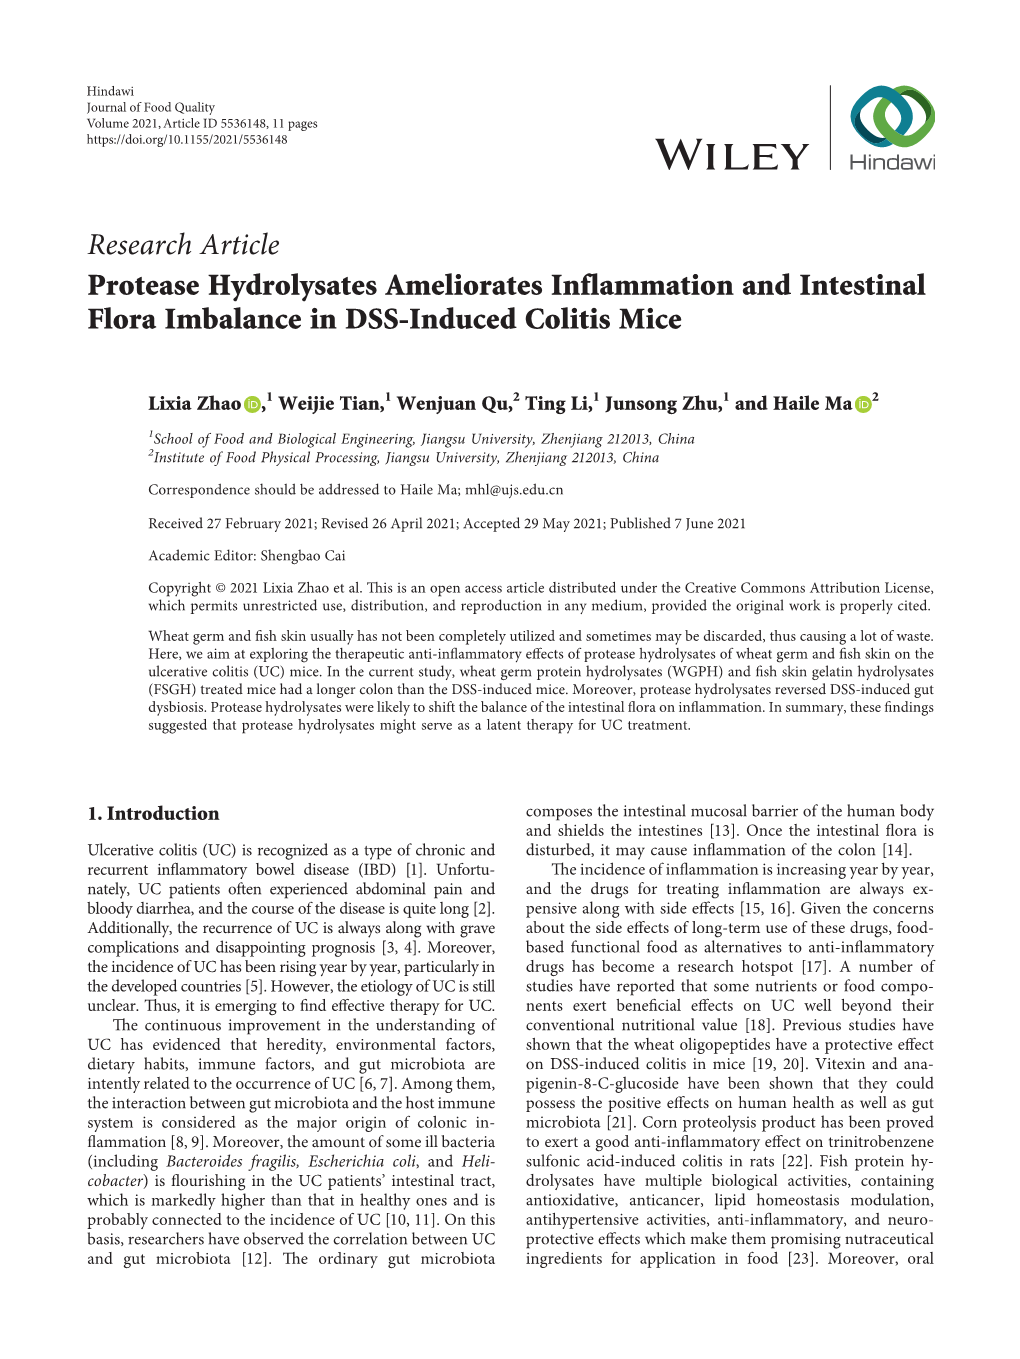 Research Article Protease Hydrolysates Ameliorates Inflammation and Intestinal Flora Imbalance in DSS-Induced Colitis Mice